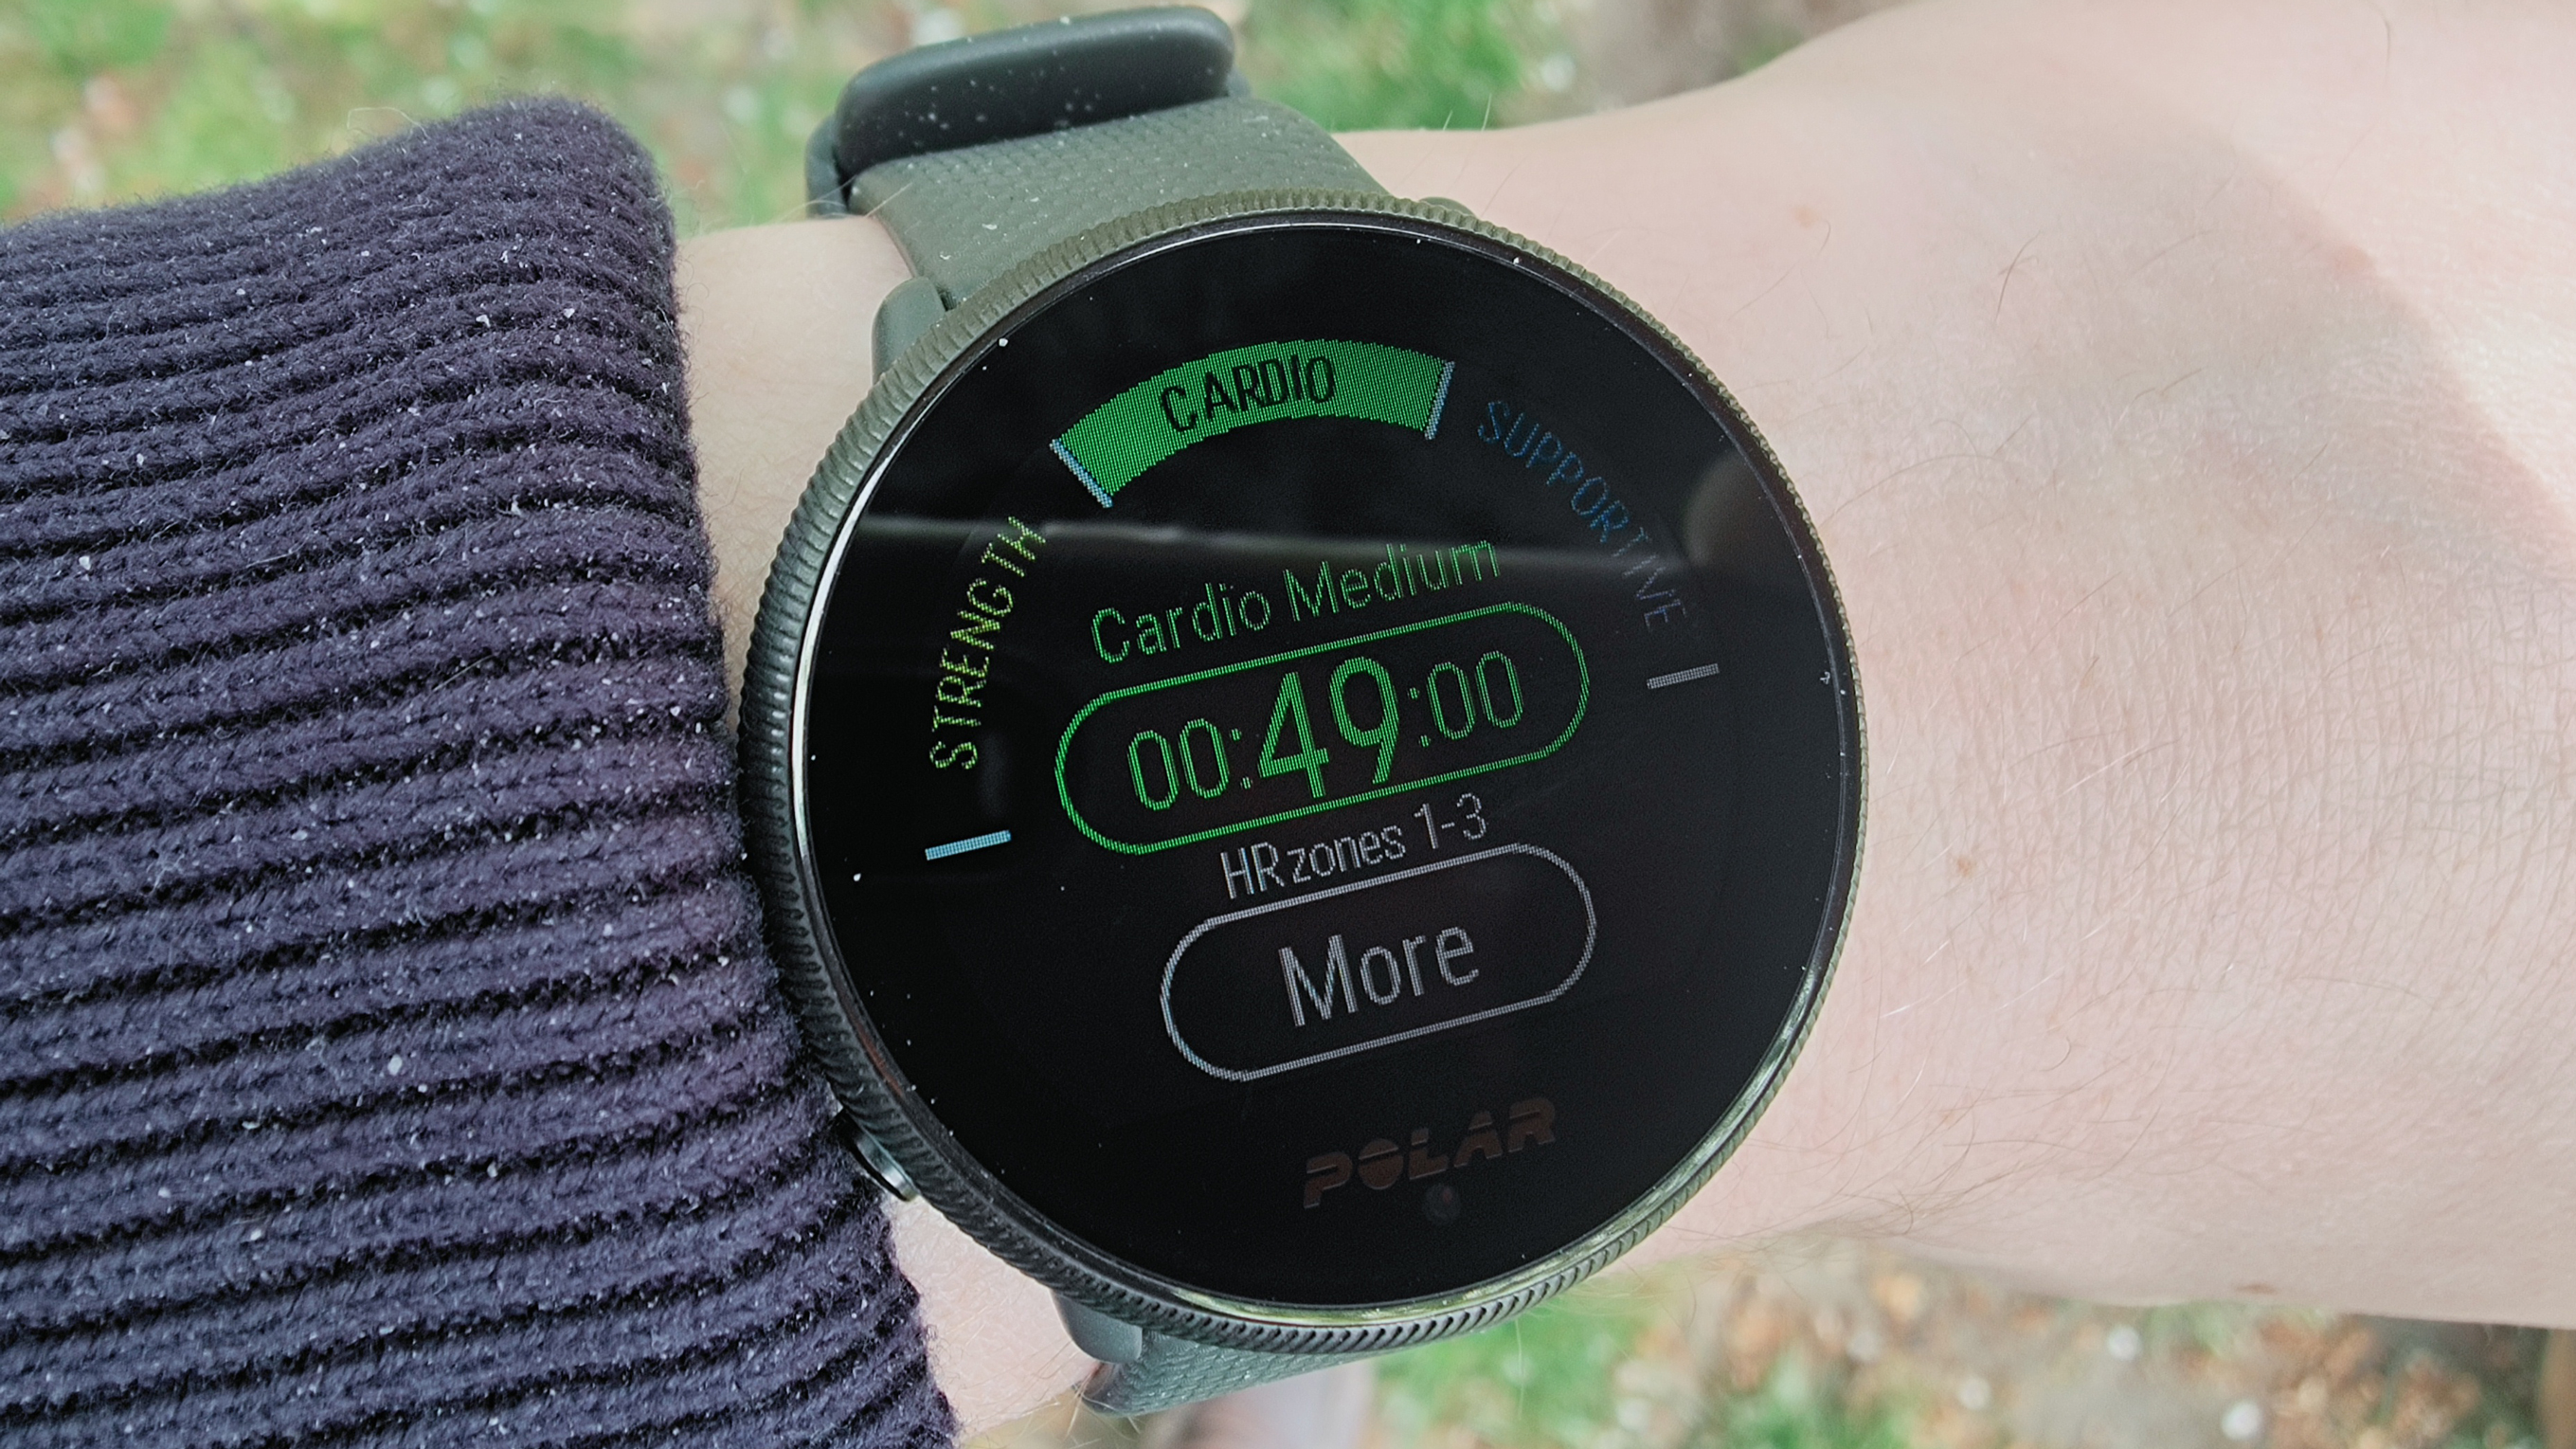 Polar Ignite 2 review: A top fitness watch with tons of